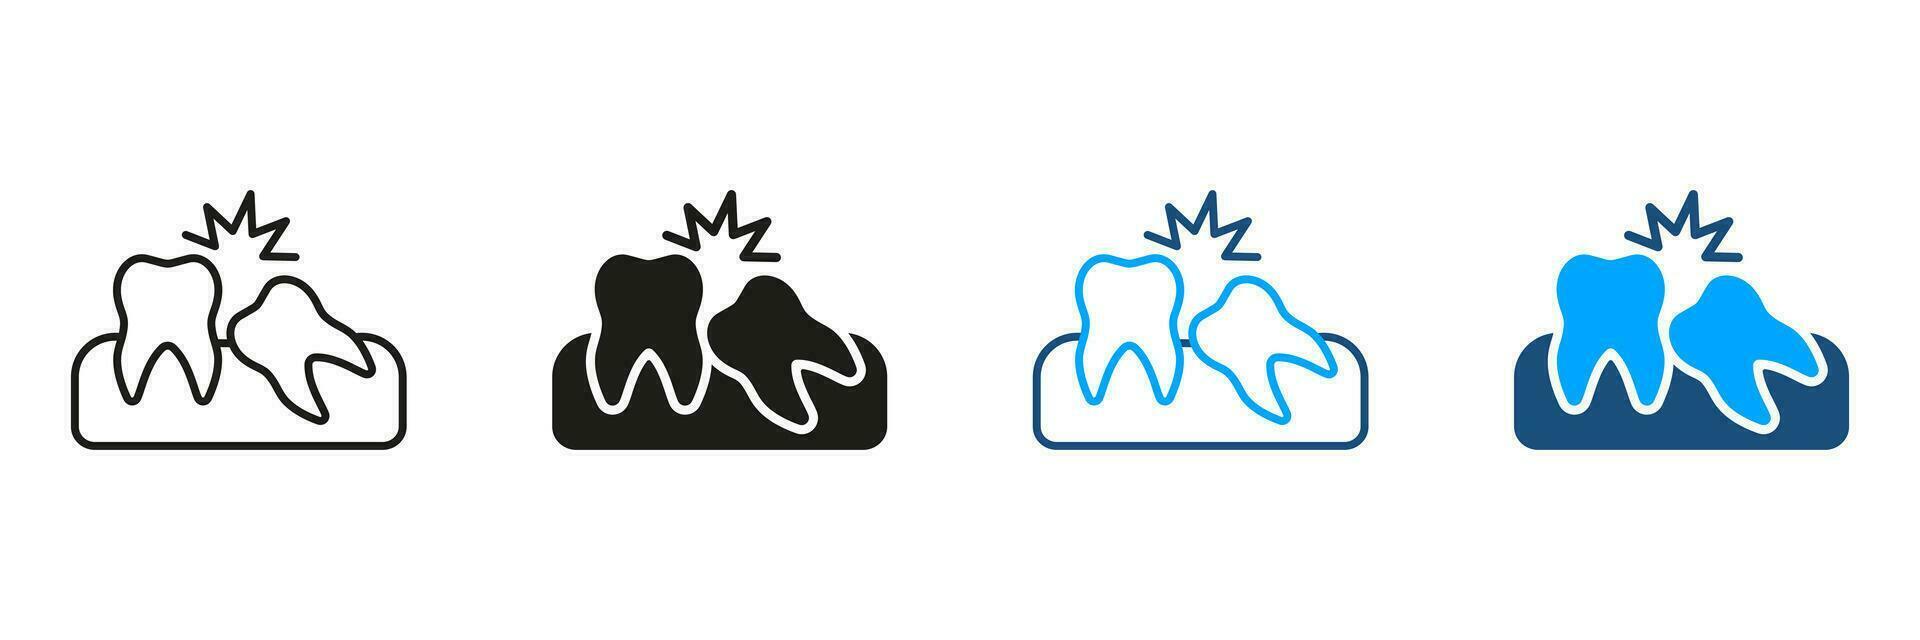 Wisdom Tooth Disease Symbol Collection. Crooked Teeth Silhouette and Line Icons Set. Oral Care, Malocclusion Medical Problem Pictogram. Dental Treatment, Dentistry Sign. Isolated Vector Illustration.